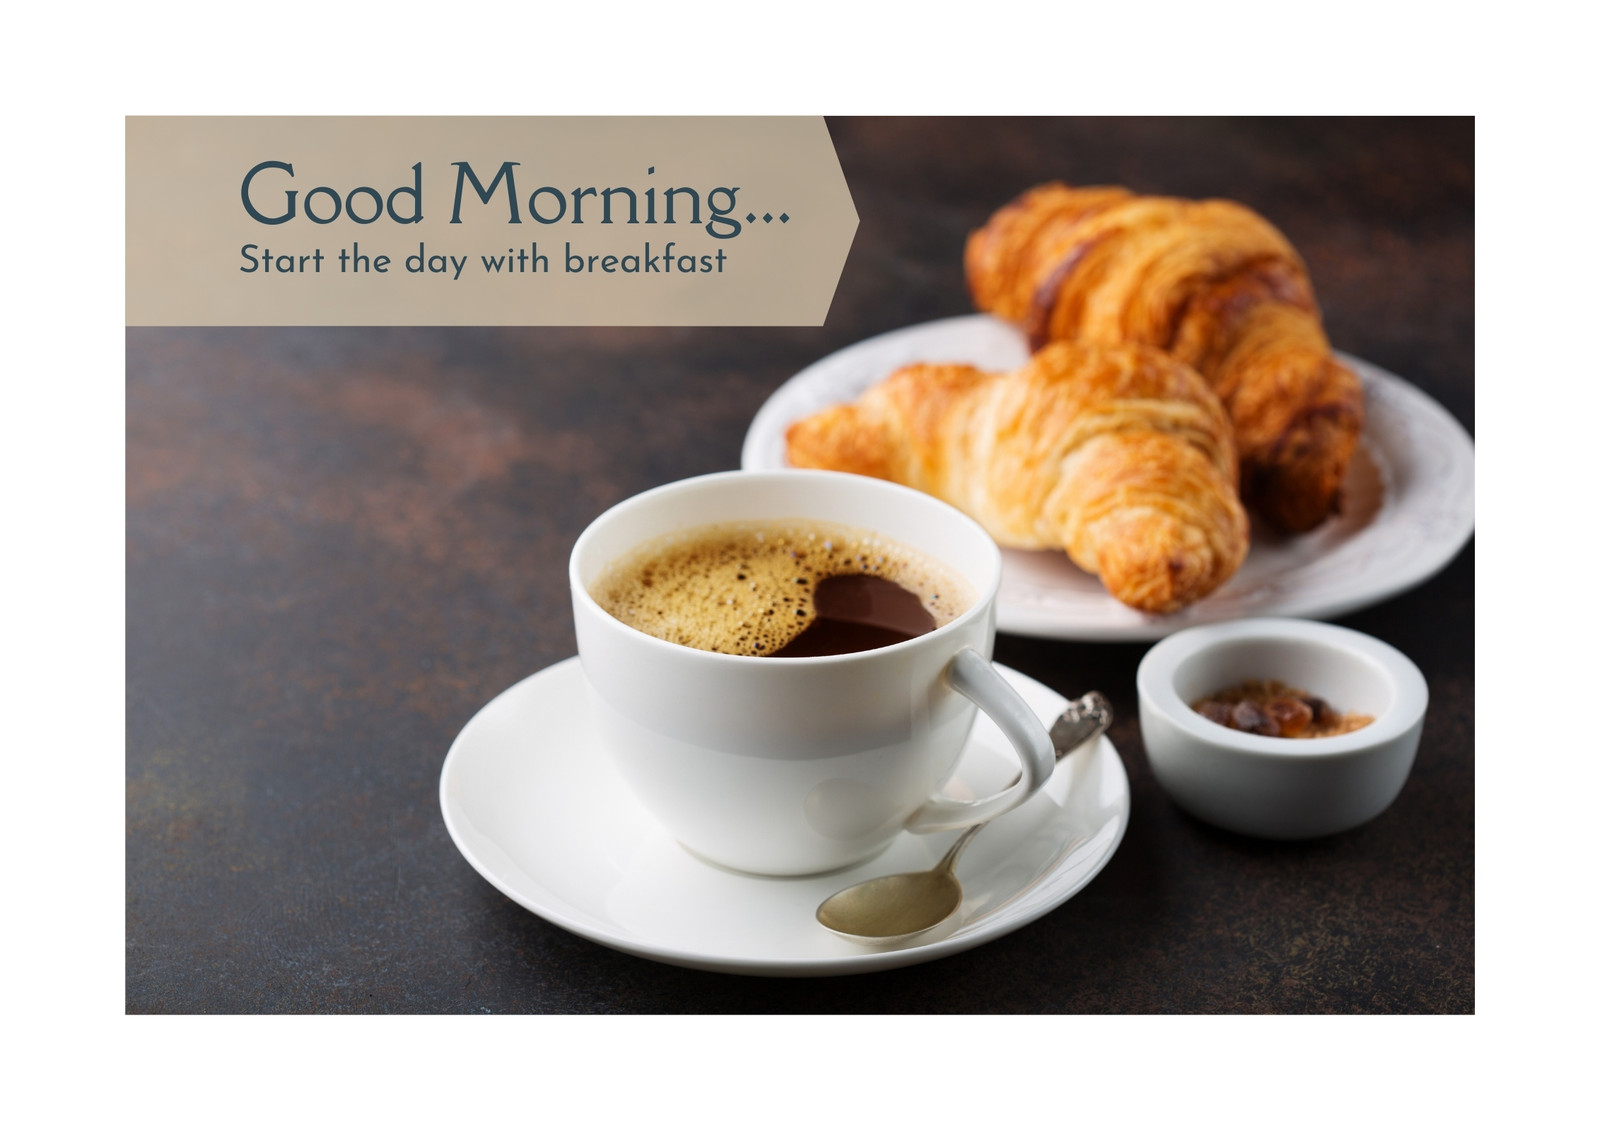 Page 18 - Free and customizable good morning wallpaper templates